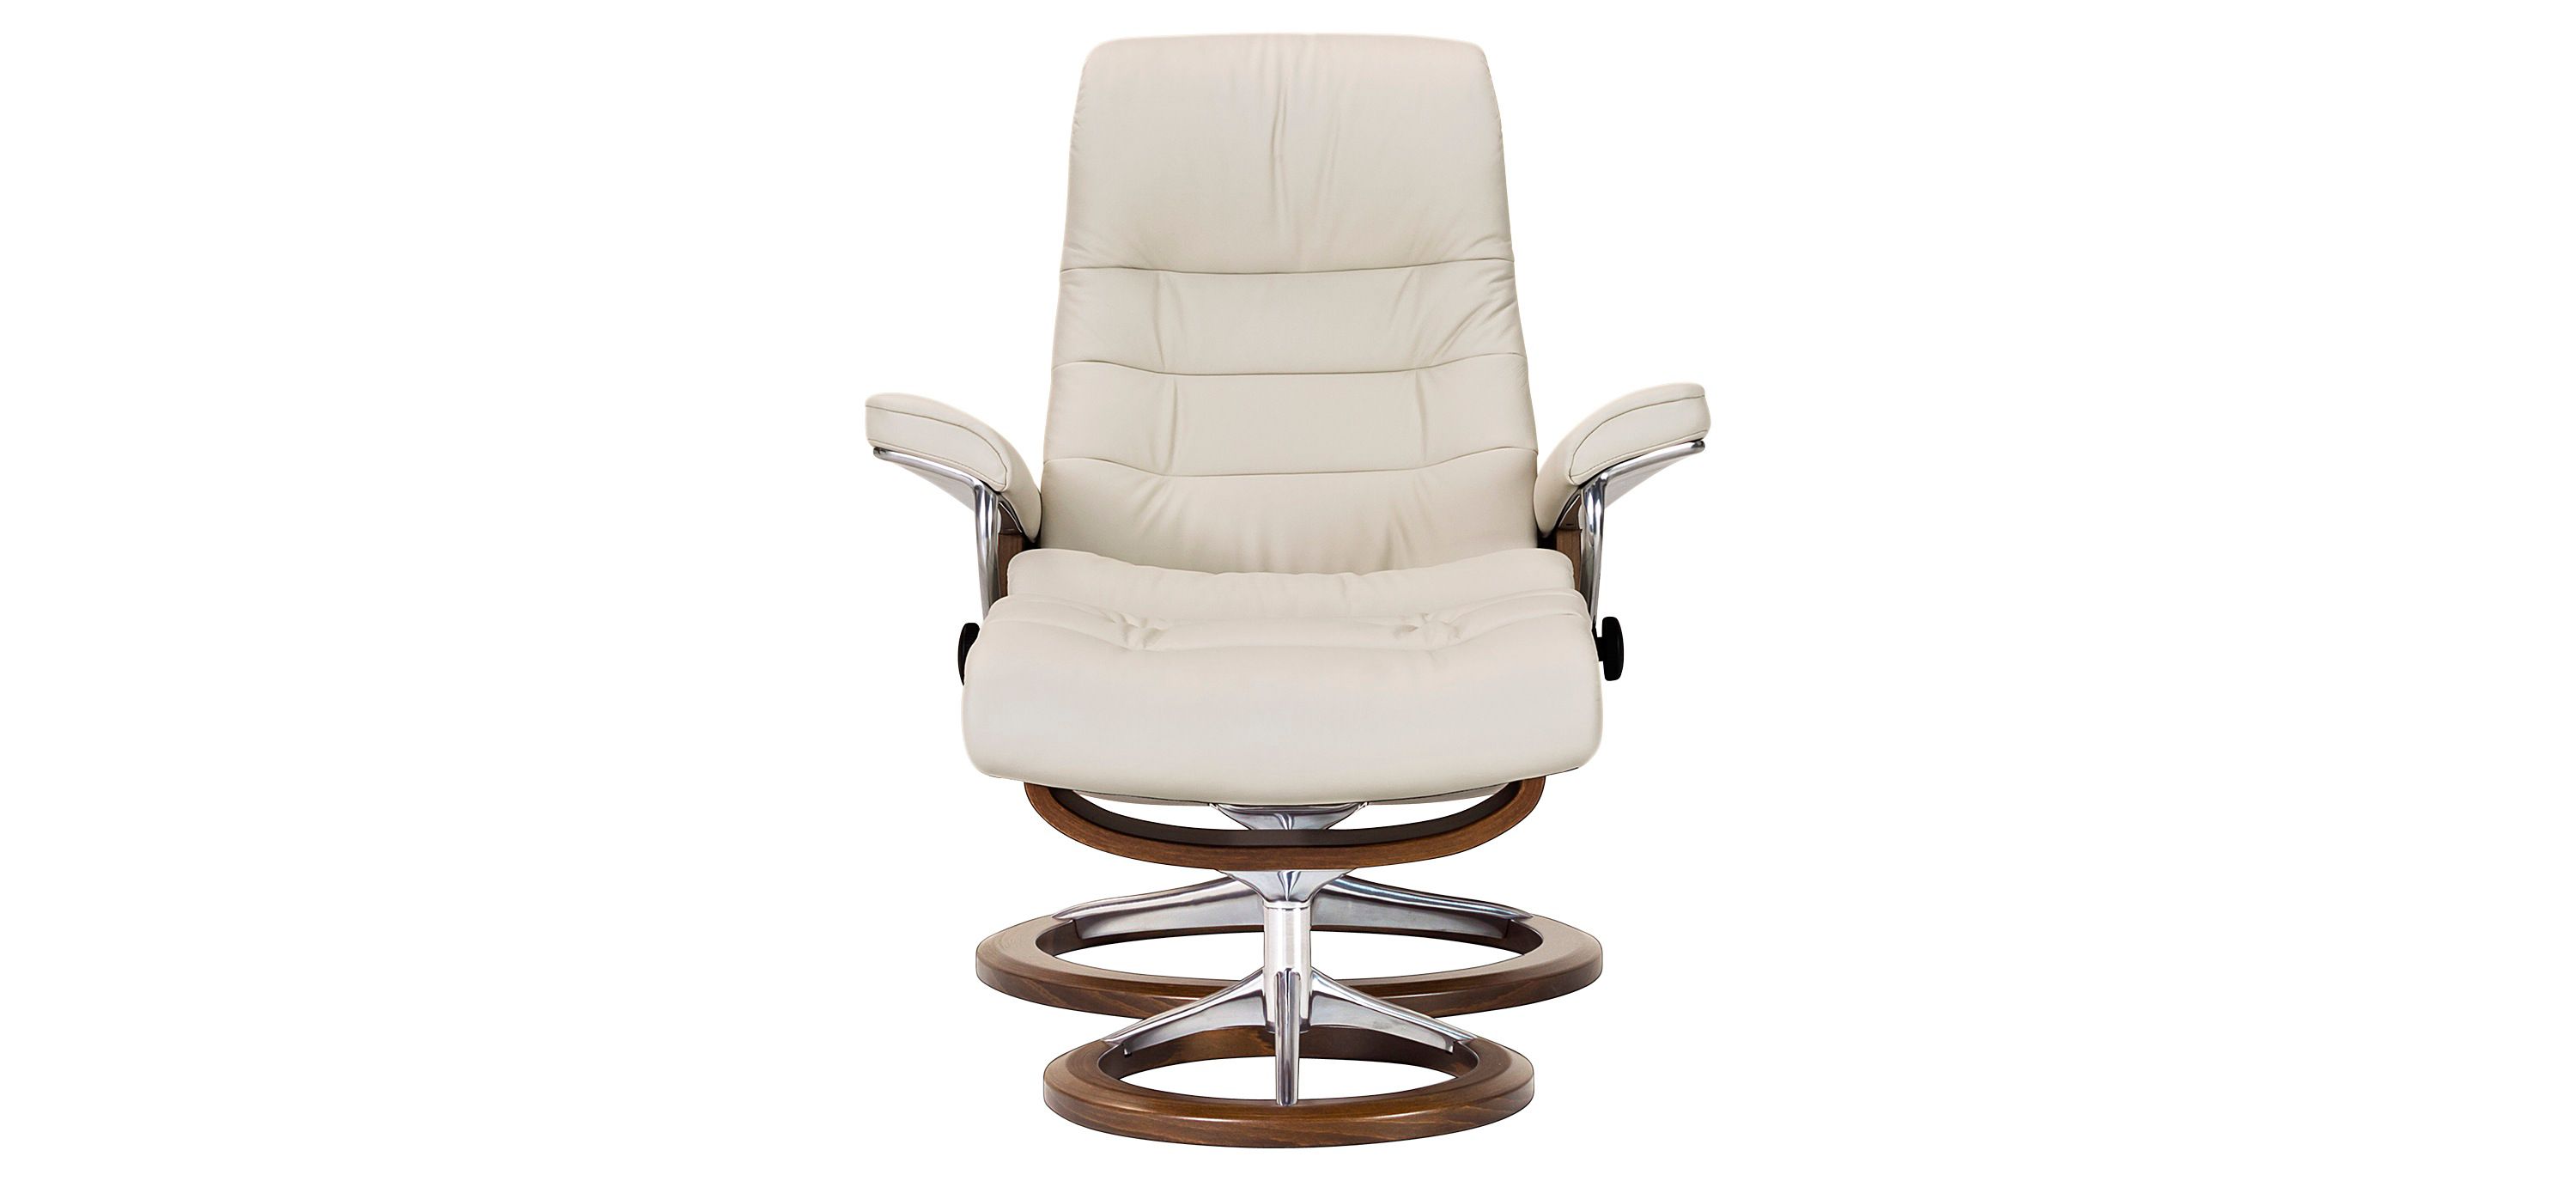 Stressless Opal Medium Leather Reclining Chair and Ottoman